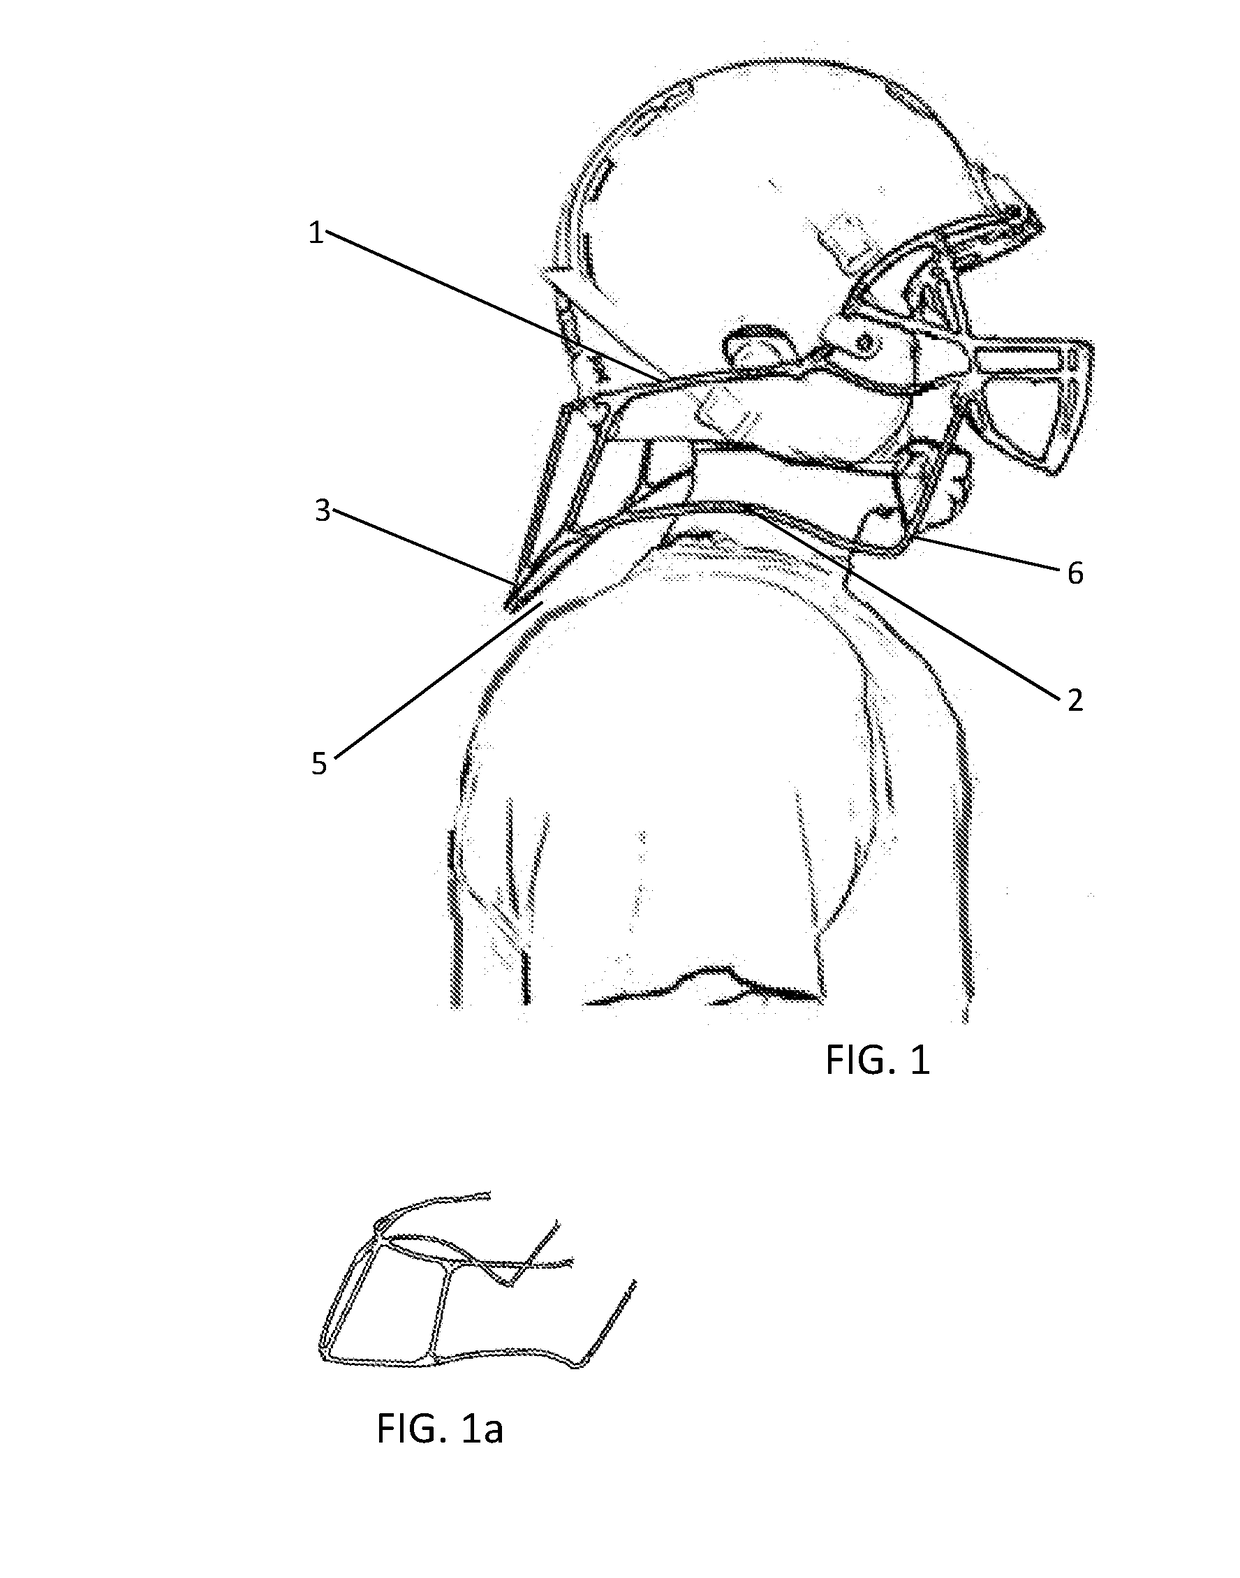 Concussive Reduction Helmet Attachment(s) Translational Axial Rotation Control and Bracing System (TARCBS).